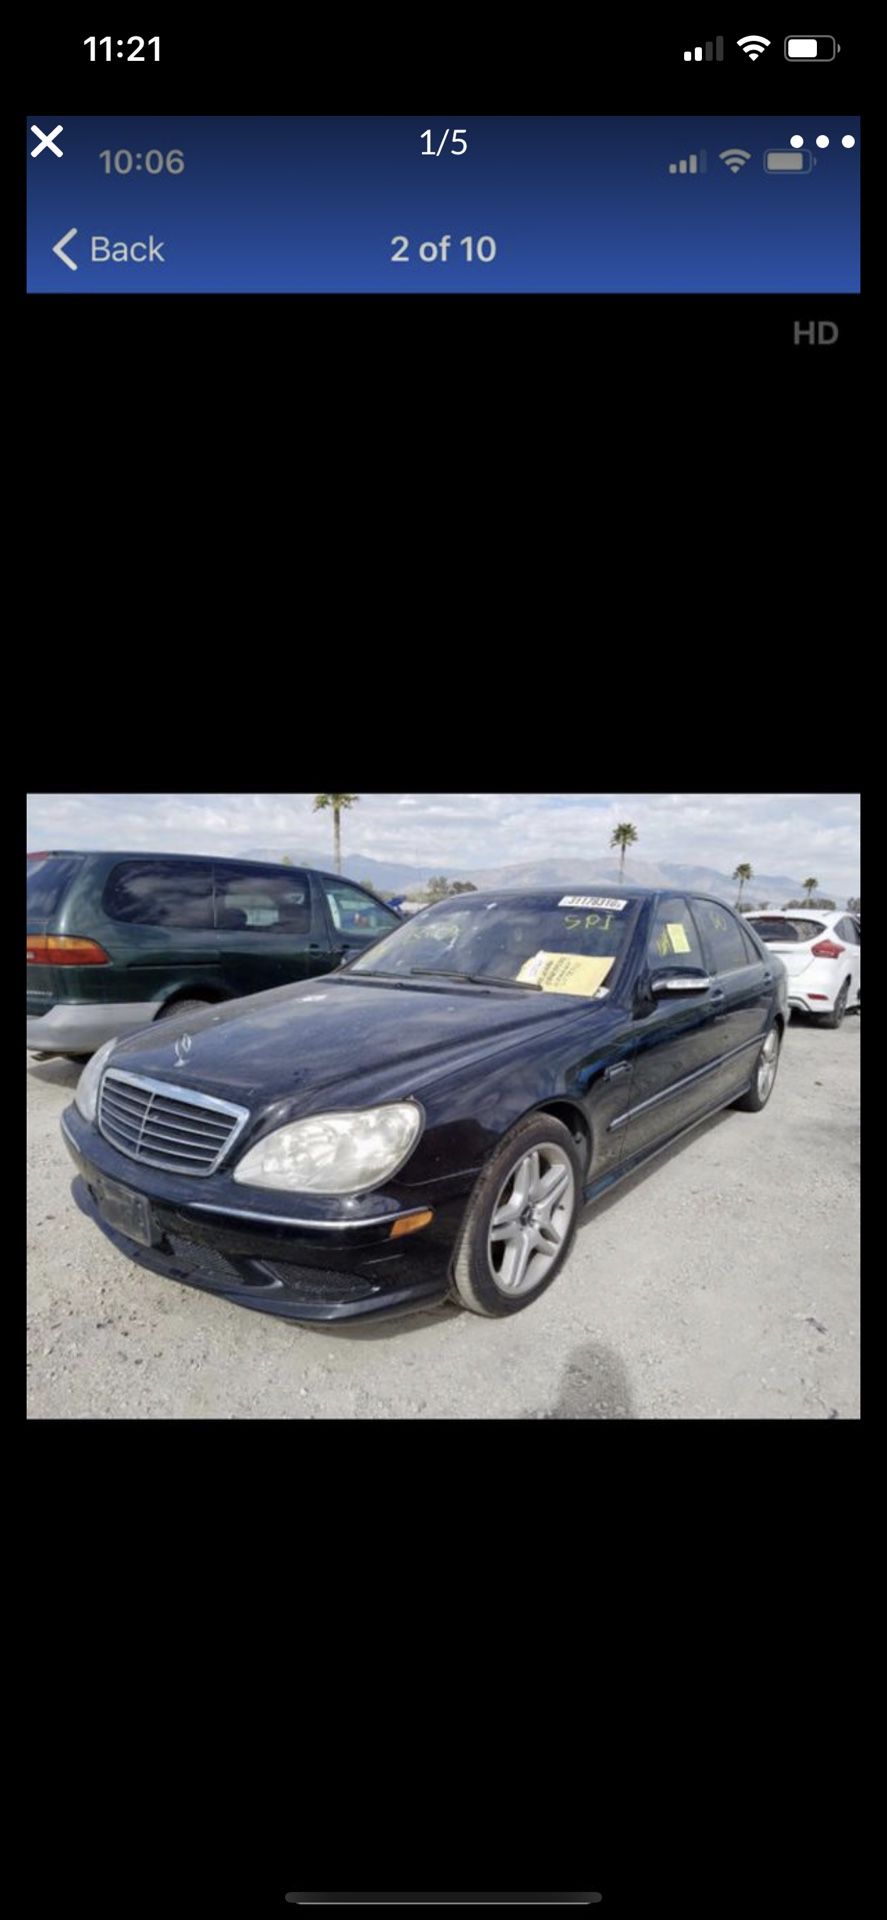 Mercedes Benz S430 S500 S55 S600 S class ** AMG ** SPORT ** PARTING OUT ** W220 **